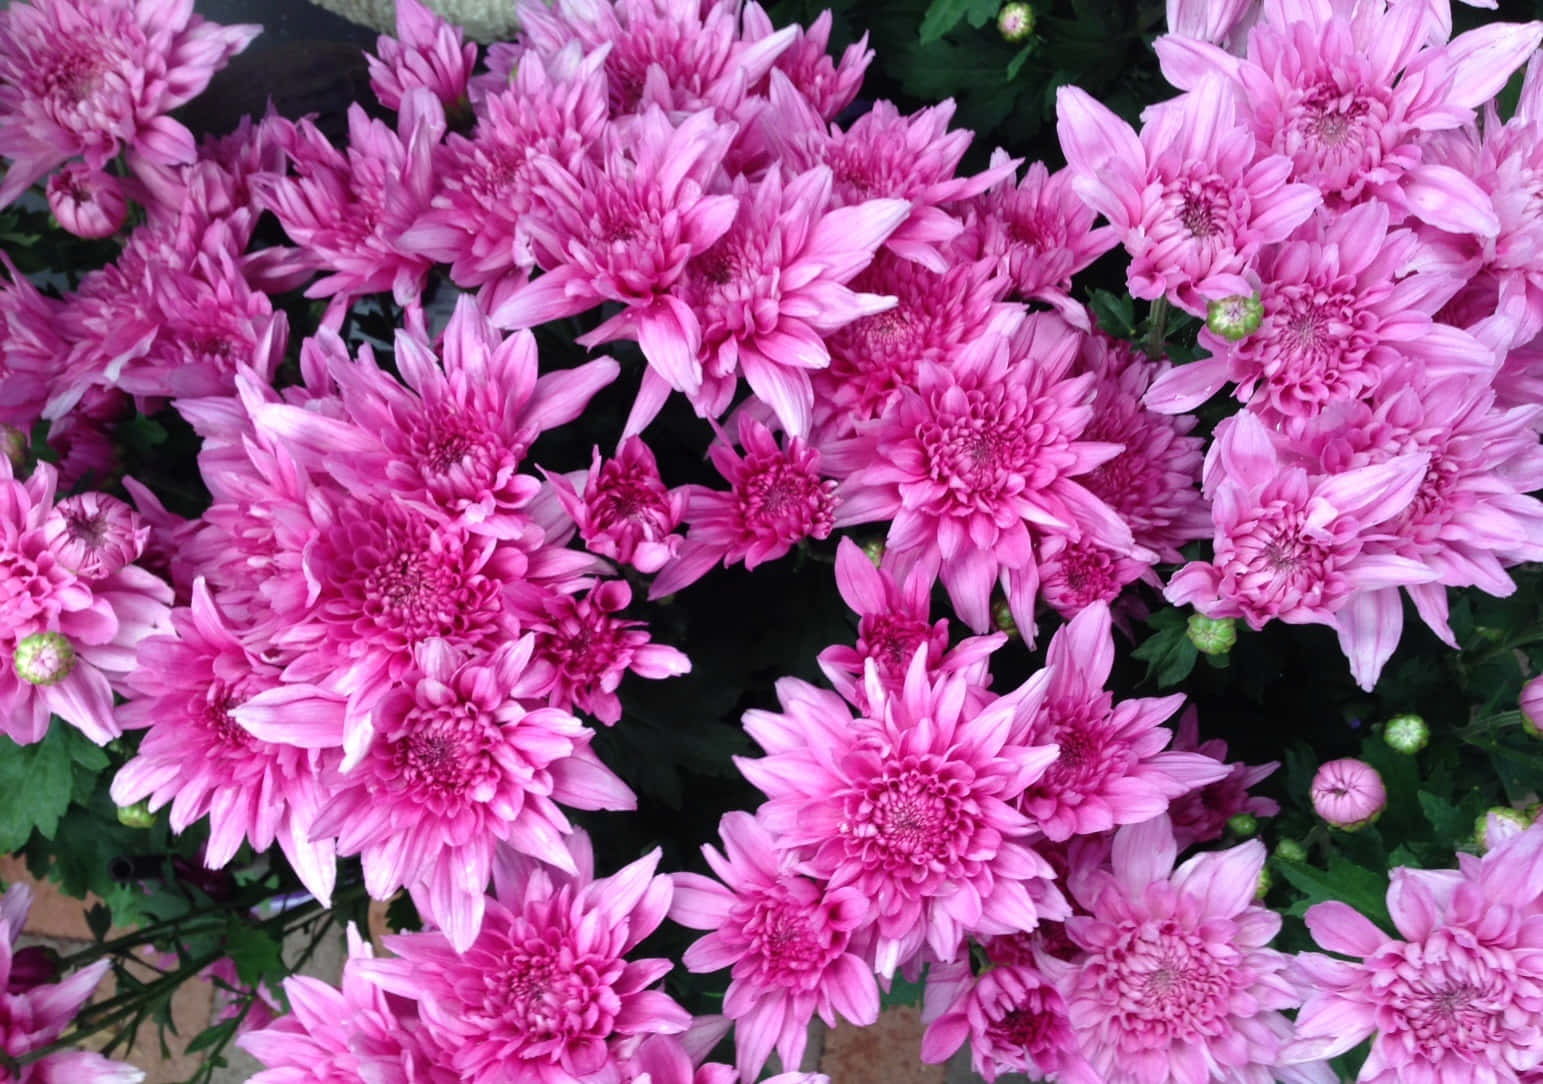 "The beauty of the Chrysanthemum"